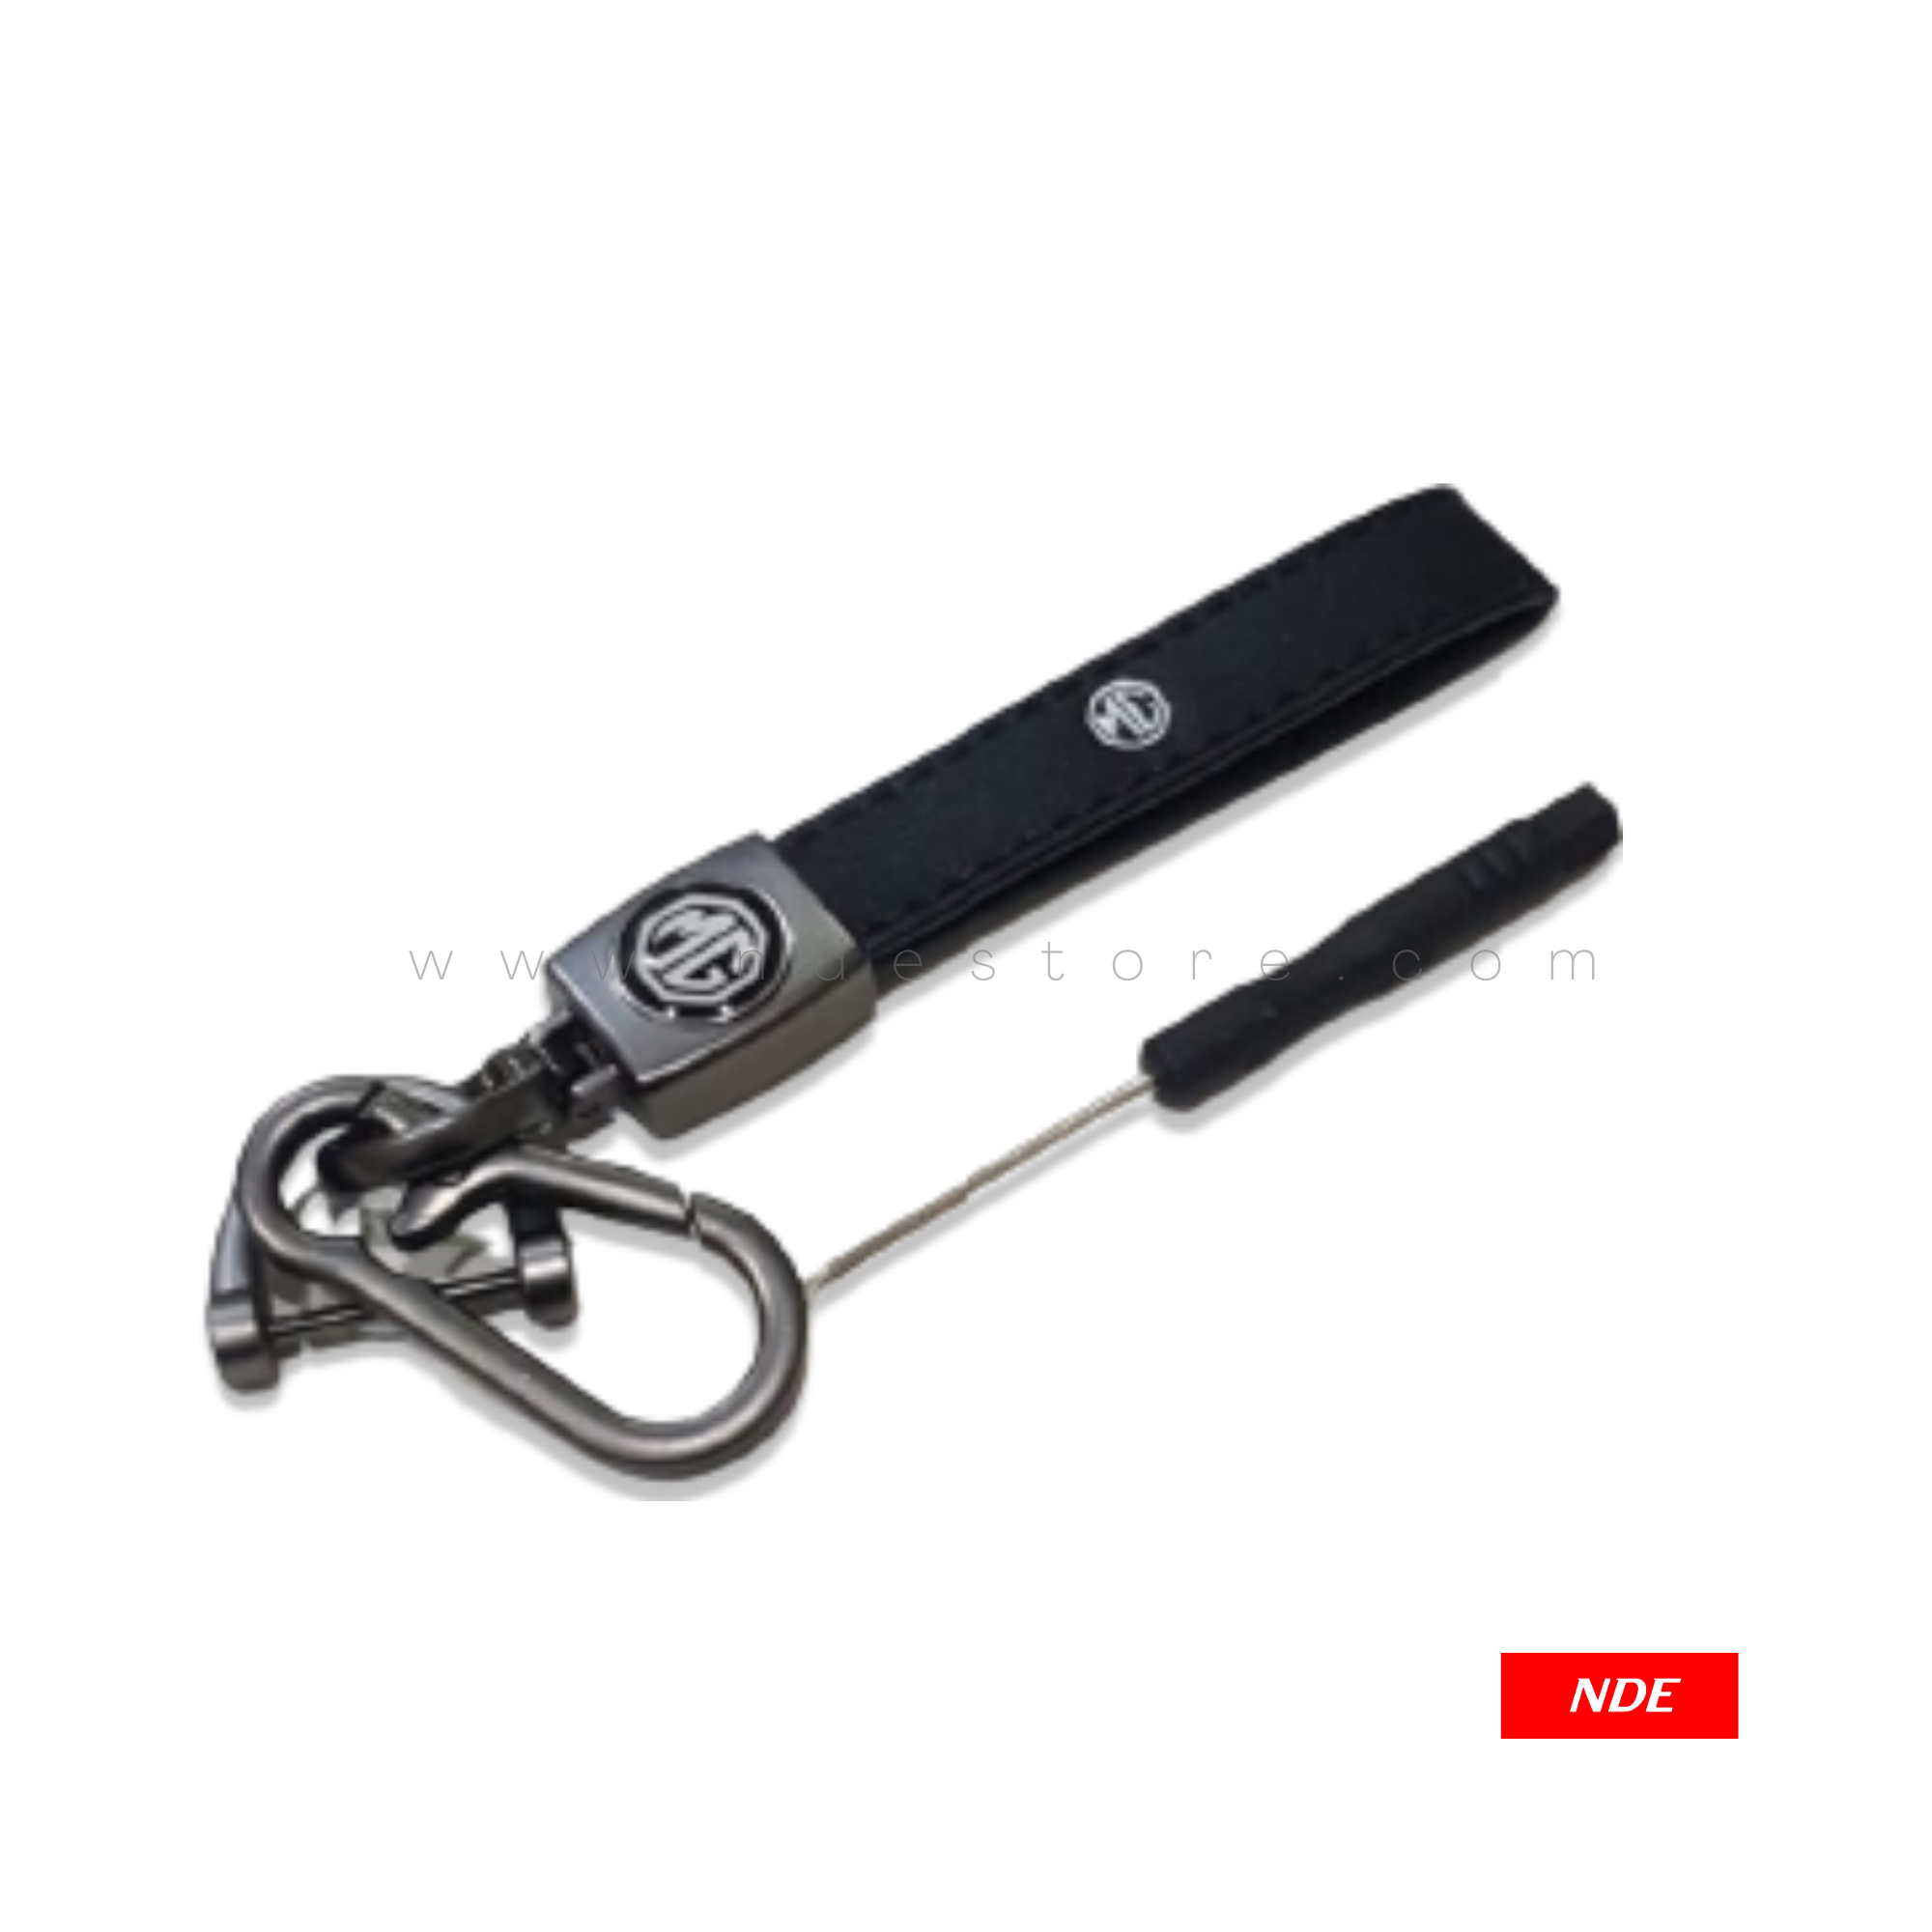 KEY CHAIN LEATHER STRAP WITH MG LOGO